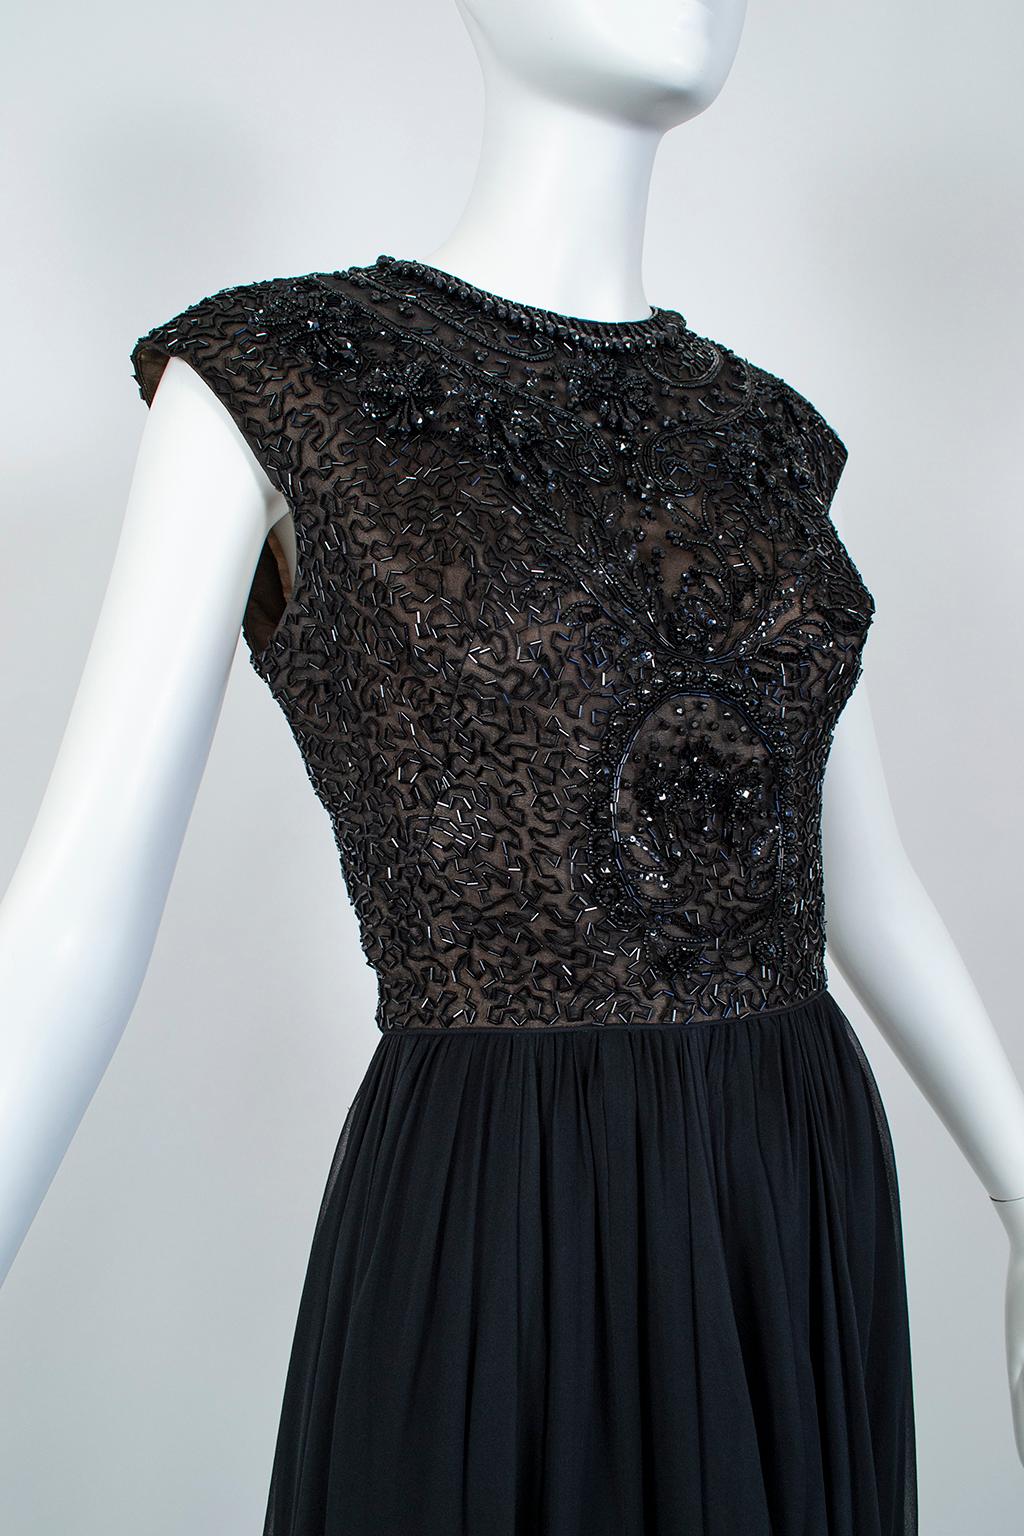 Black Chandelier Bead Illusion Party Dress with Swirling Trumpet Skirt– M, 1950s For Sale 3